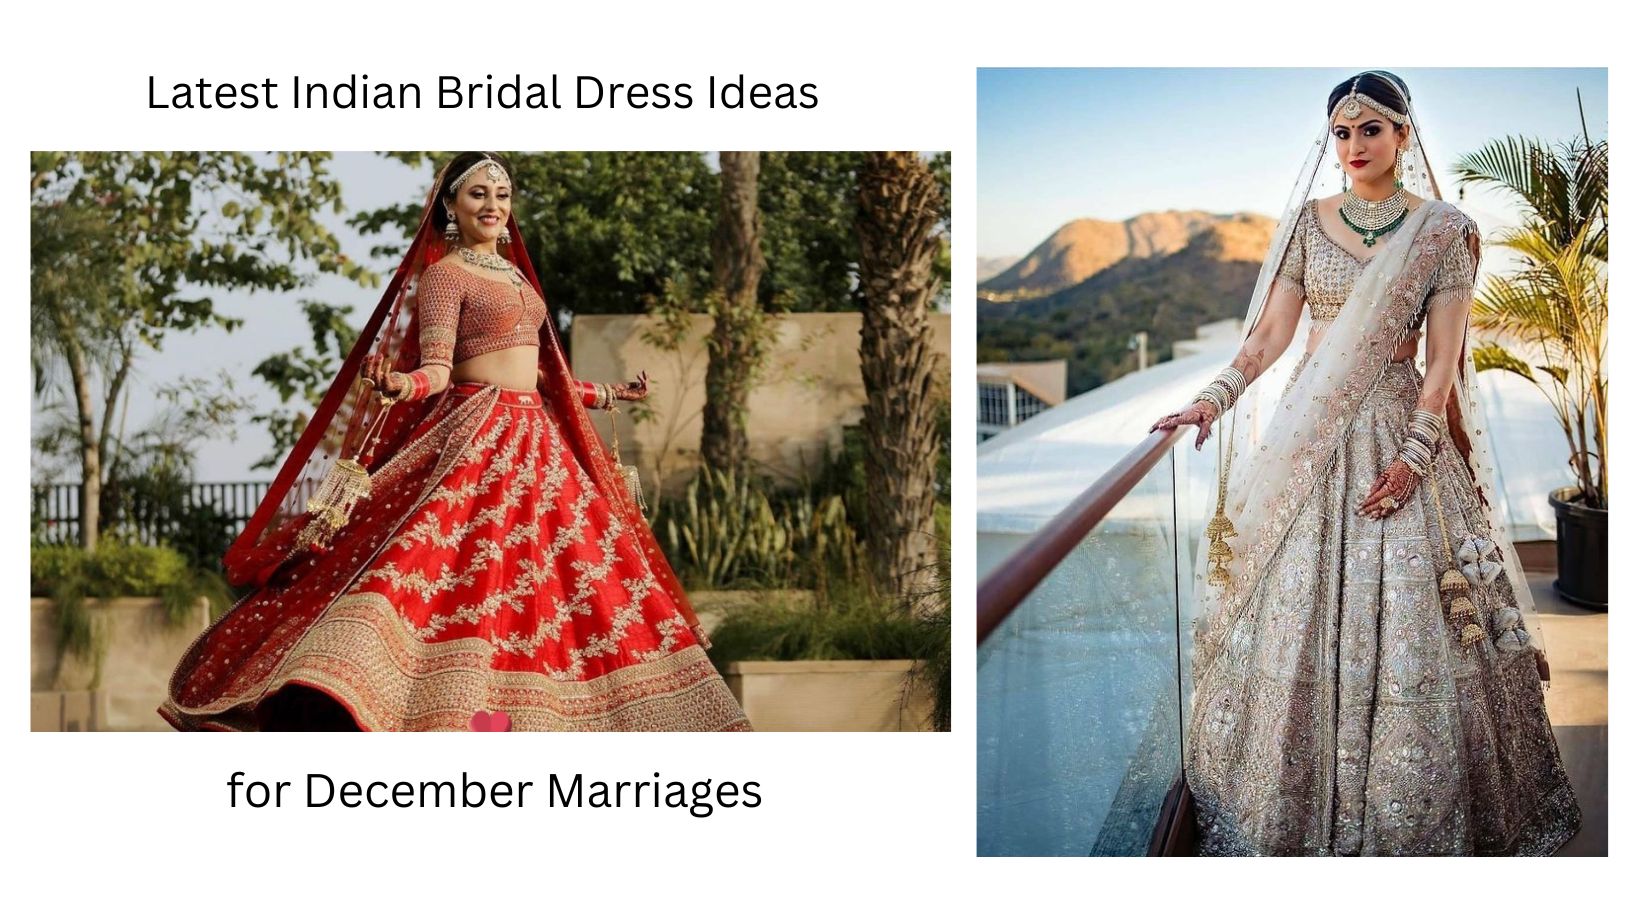 Latest Fashion Trends For Indian Wedding Dresses | symphonybanquets